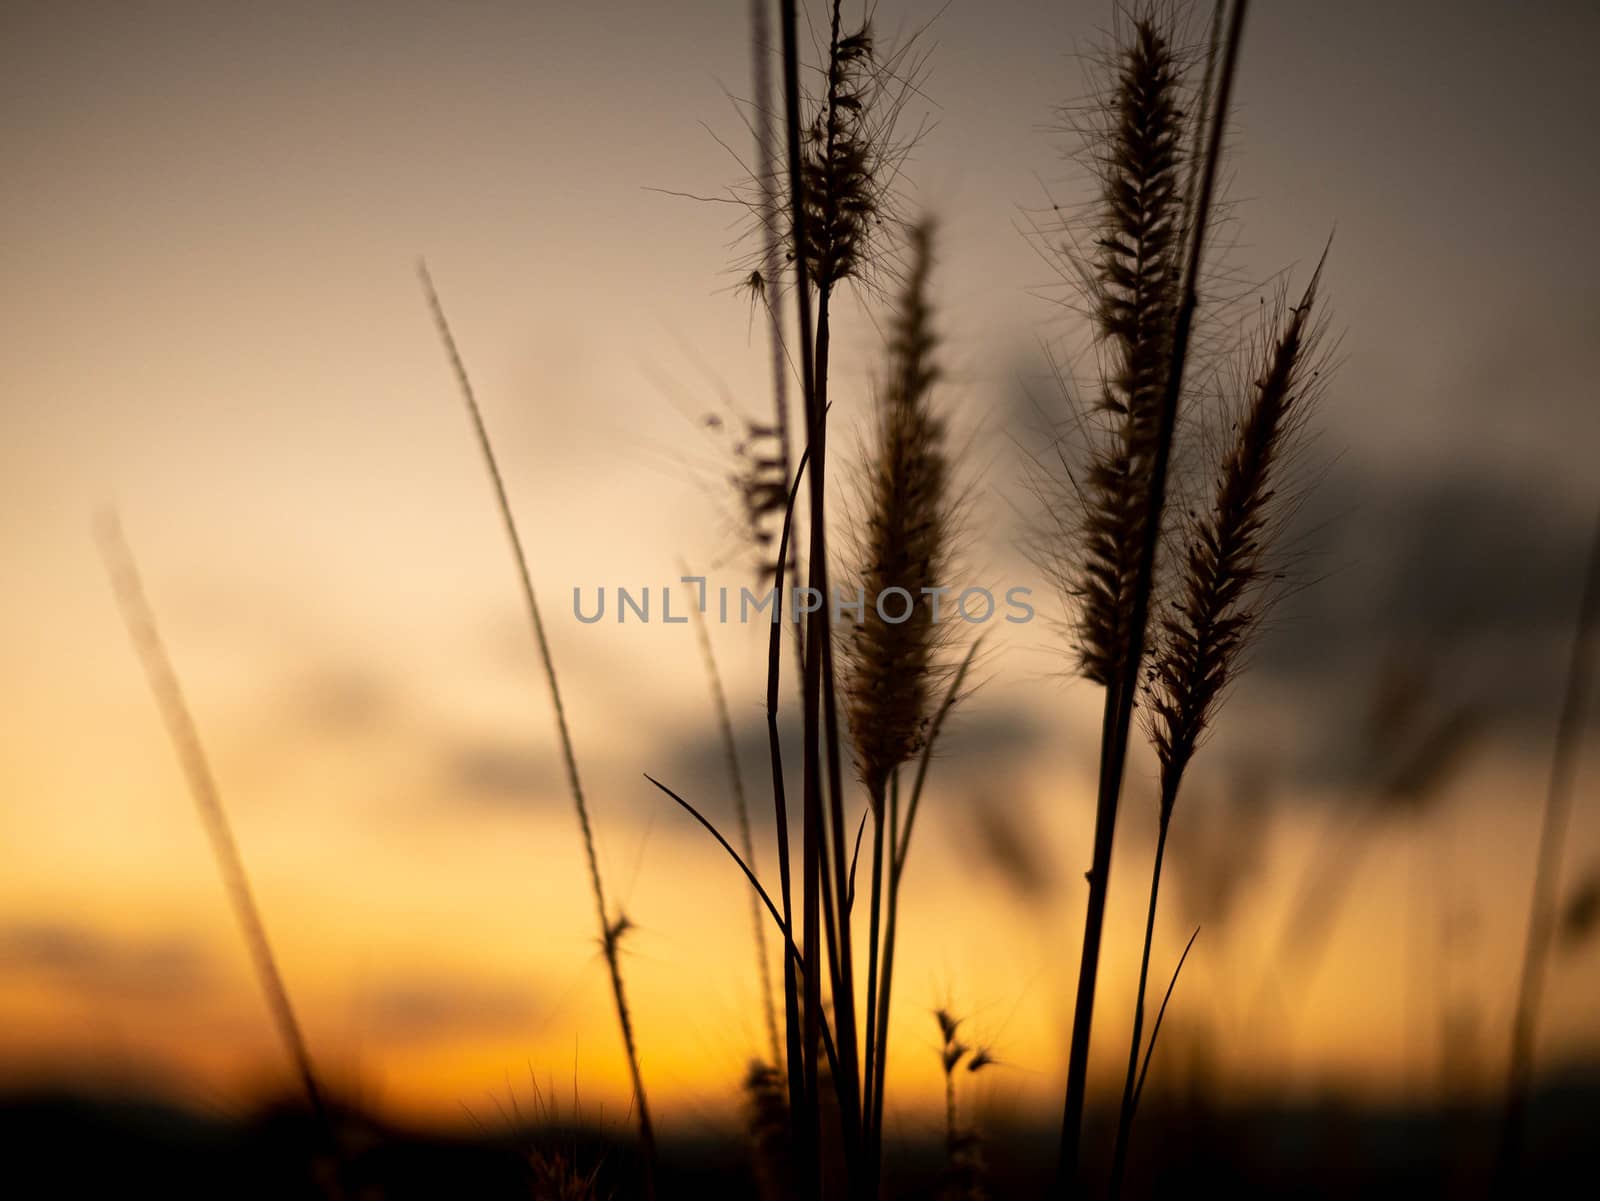 Beautiful scene of grass flower with wind blows gently on sunset background. This grass flower scientific name is Pennisetum pedicellatum.